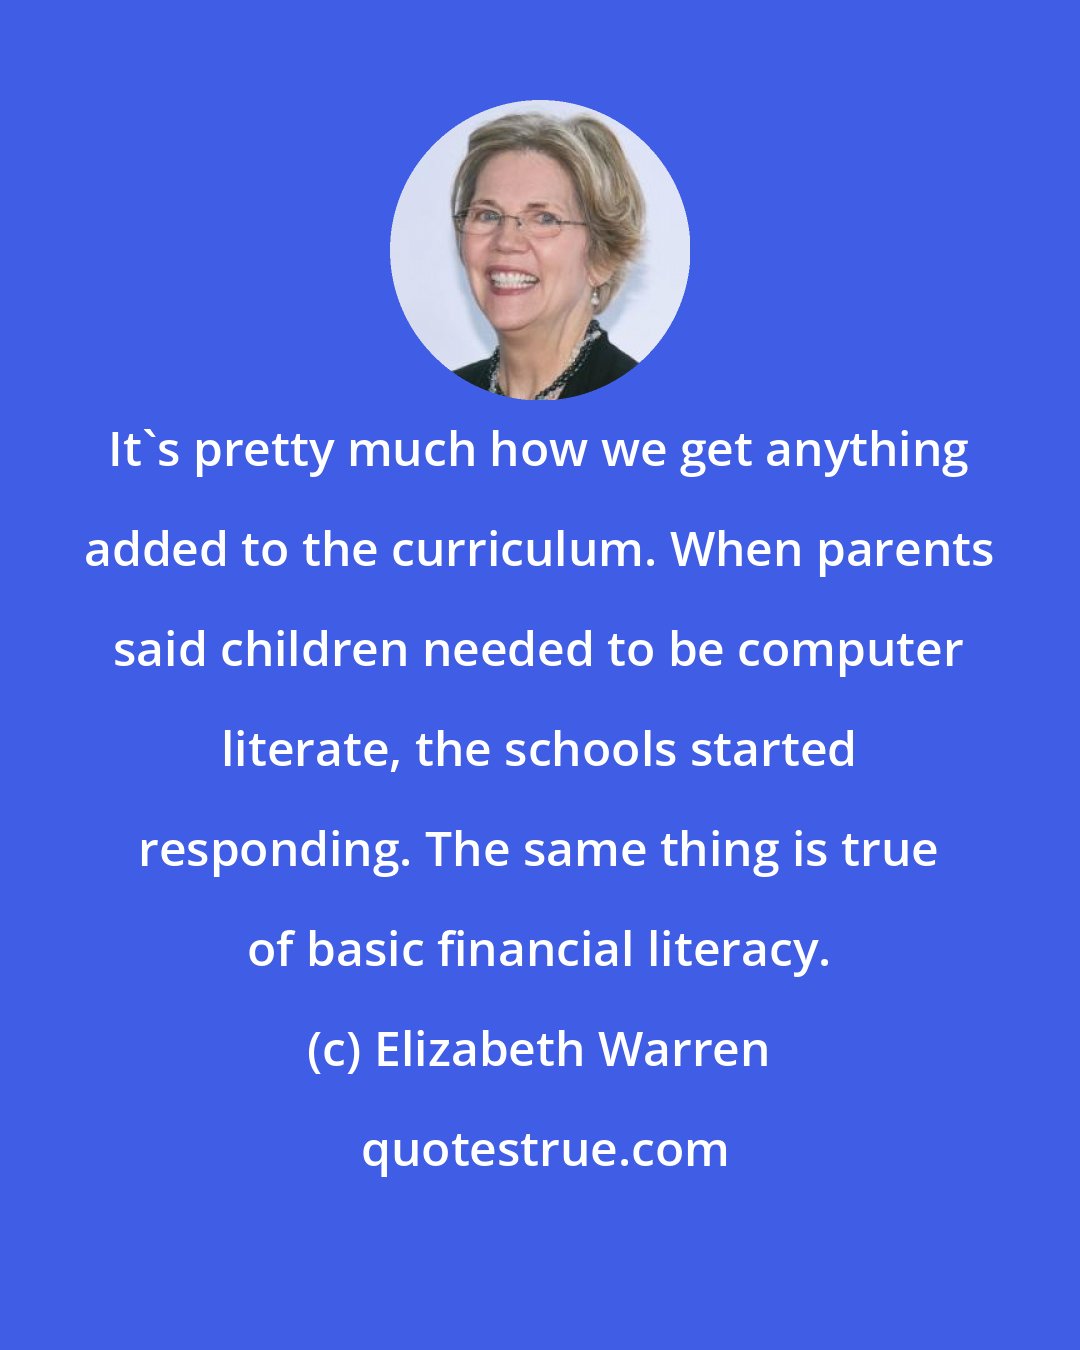 Elizabeth Warren: It's pretty much how we get anything added to the curriculum. When parents said children needed to be computer literate, the schools started responding. The same thing is true of basic financial literacy.